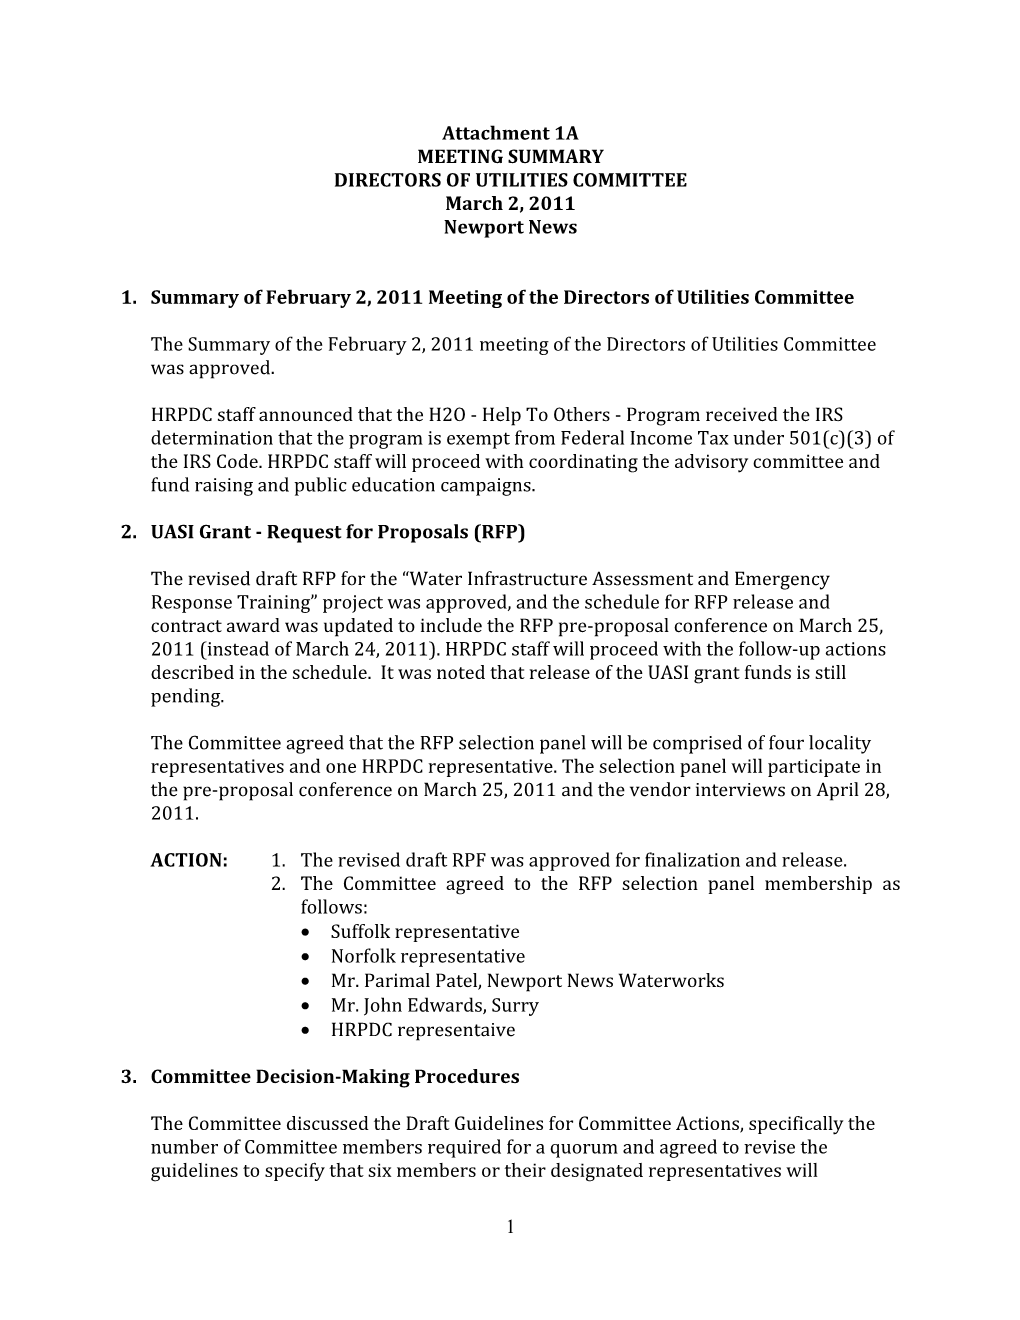 Attachment 1A MEETING SUMMARY DIRECTORS of UTILITIES COMMITTEE March 2, 2011 Newport News